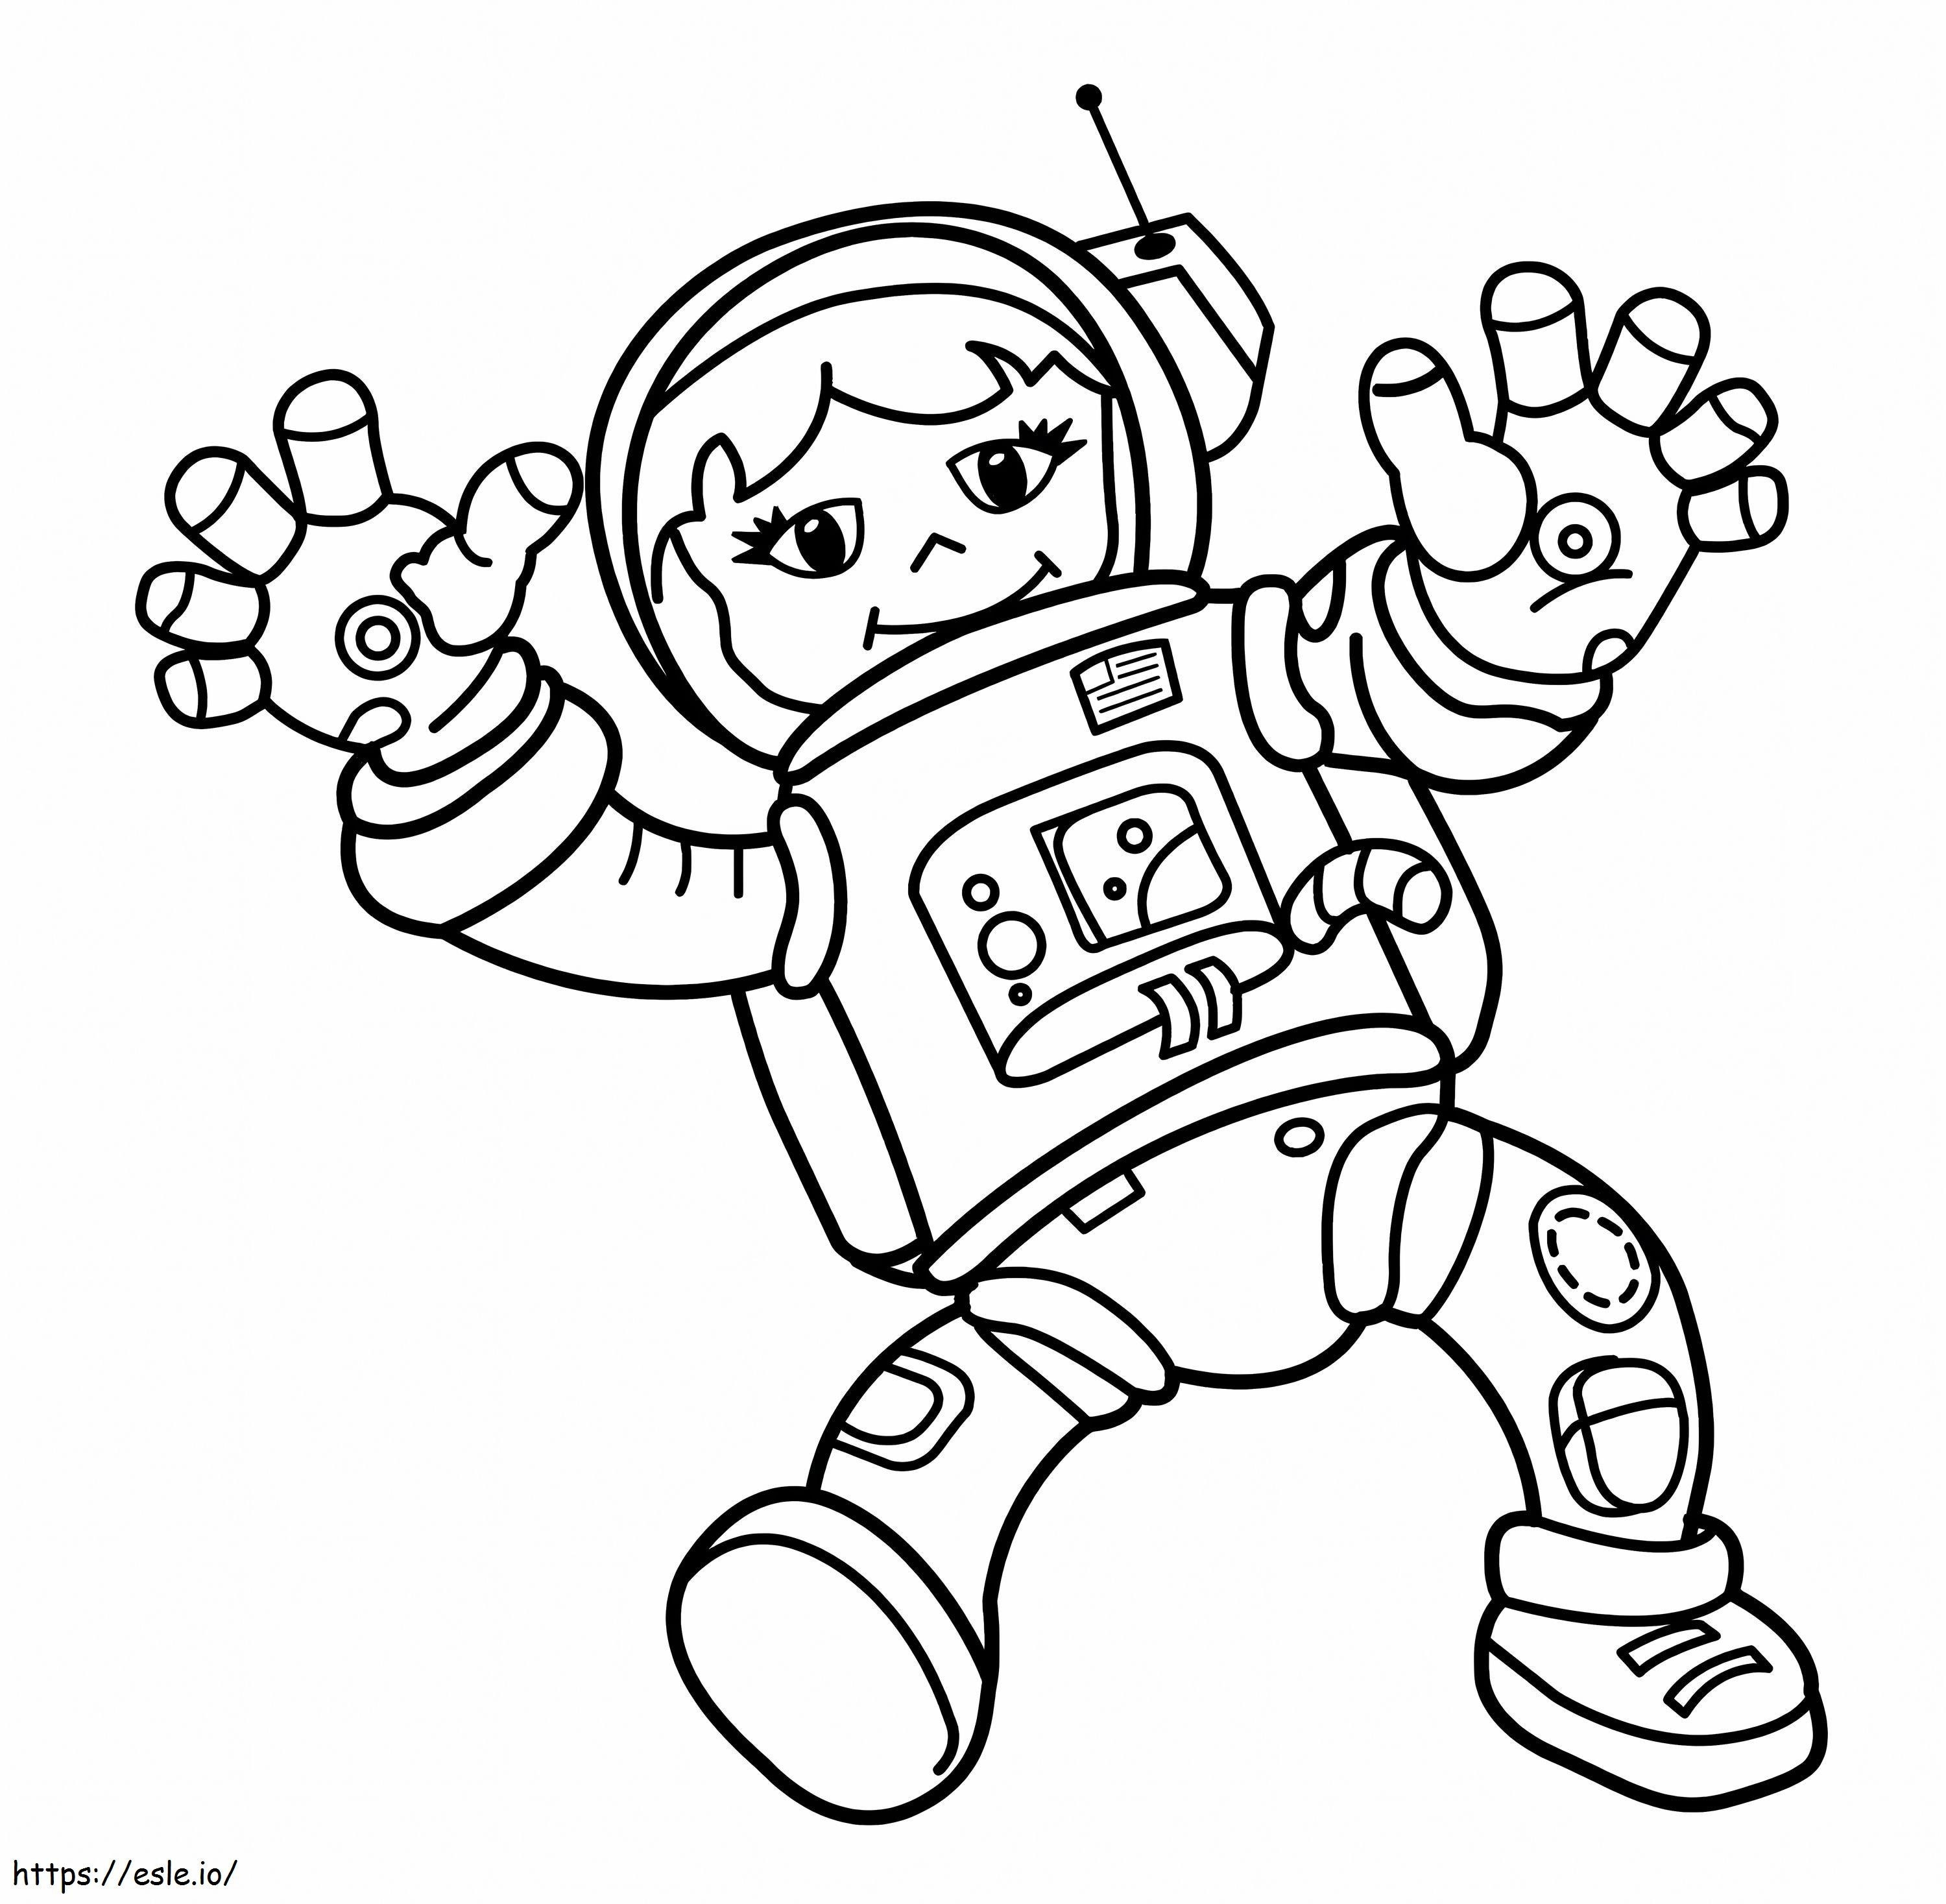 Smiling Astronaut Girl coloring page